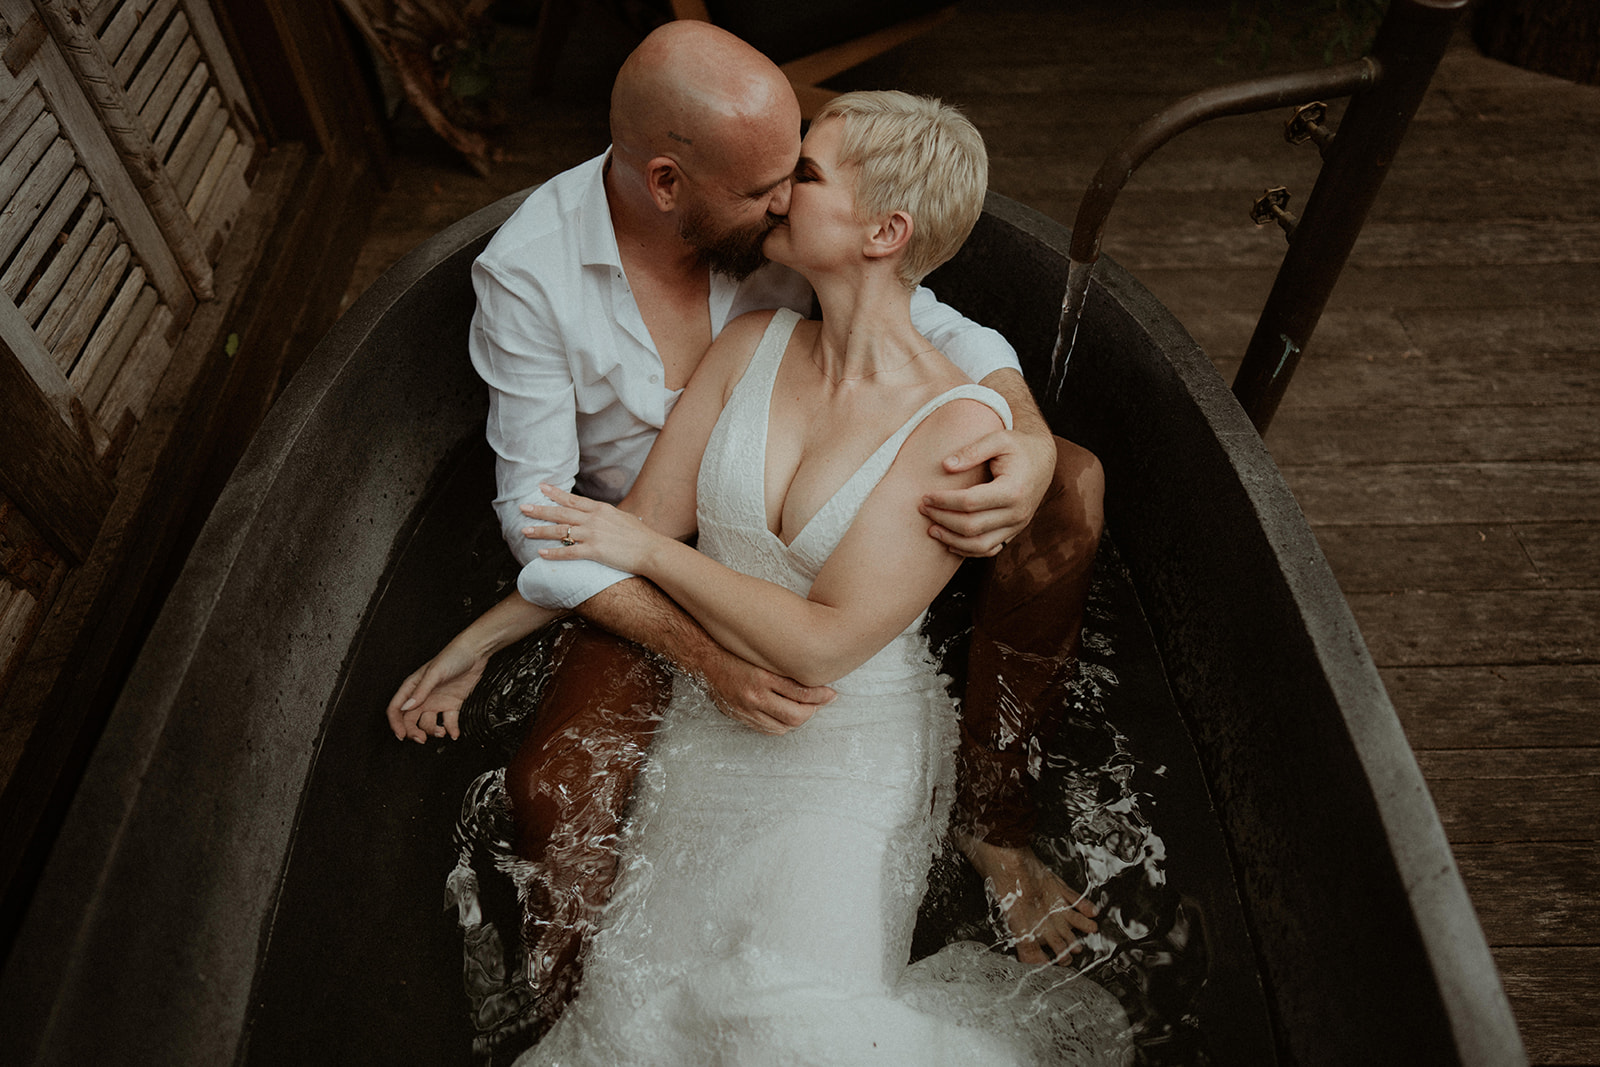 A bride and groom in a bath tub on an outdoor deck in Kangaroo Valley. The bathtub is filling up with water.